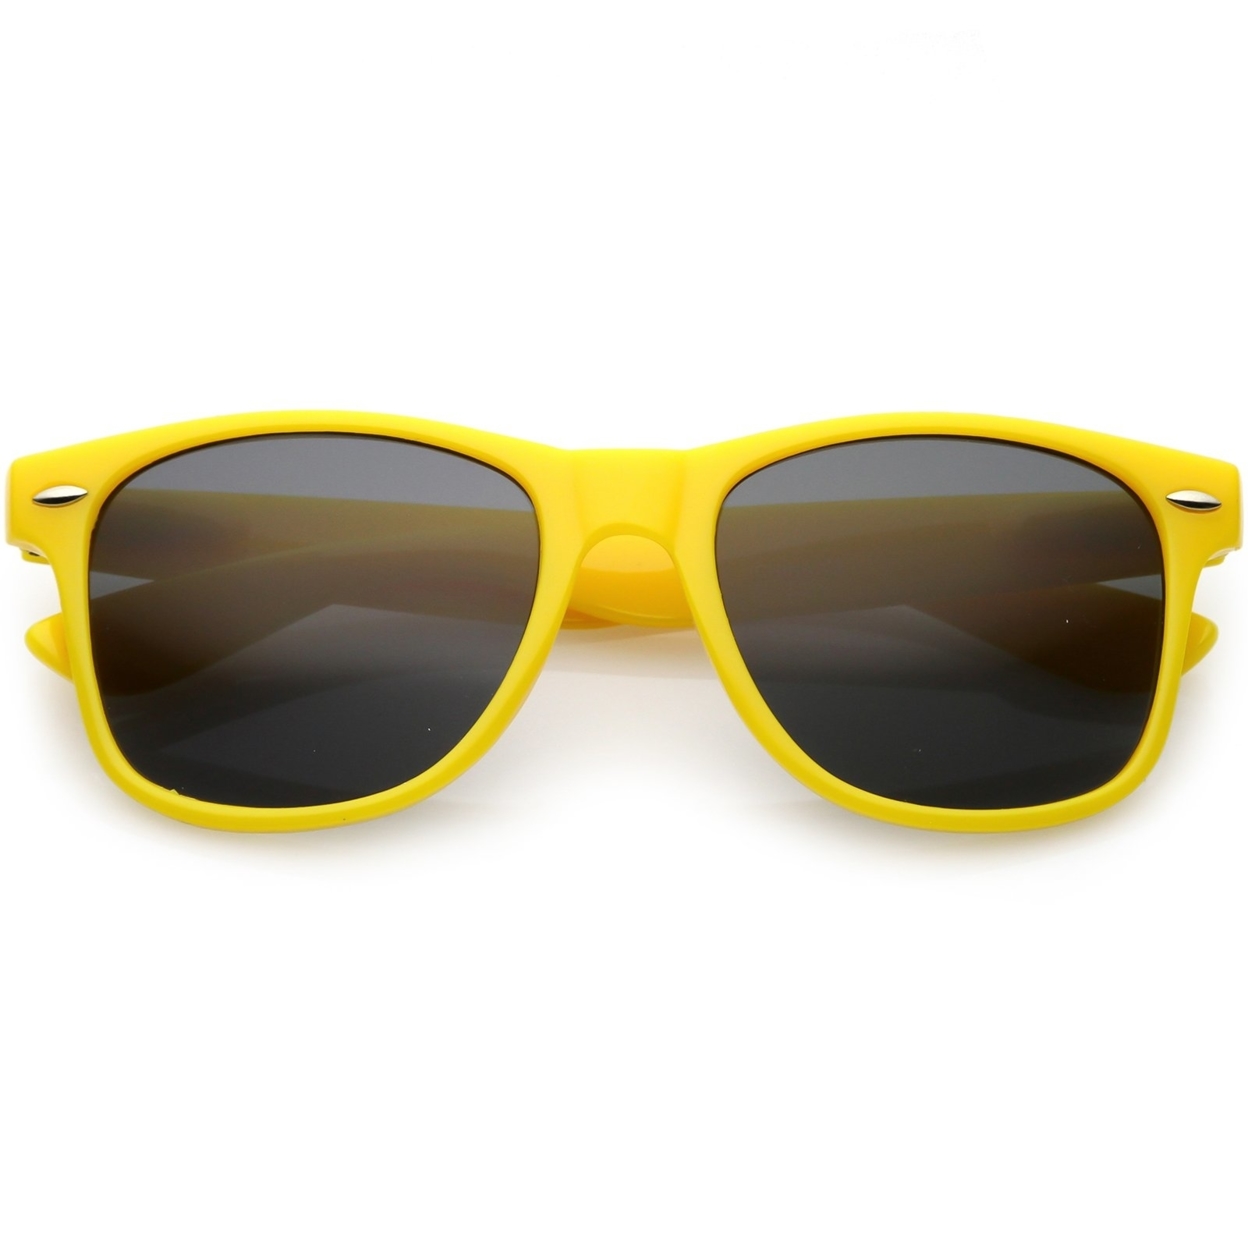 Modern Horn Rimmed Sunglasses Wide Arms Neutral Colored Square Lens 52mm - Yellow / Smoke